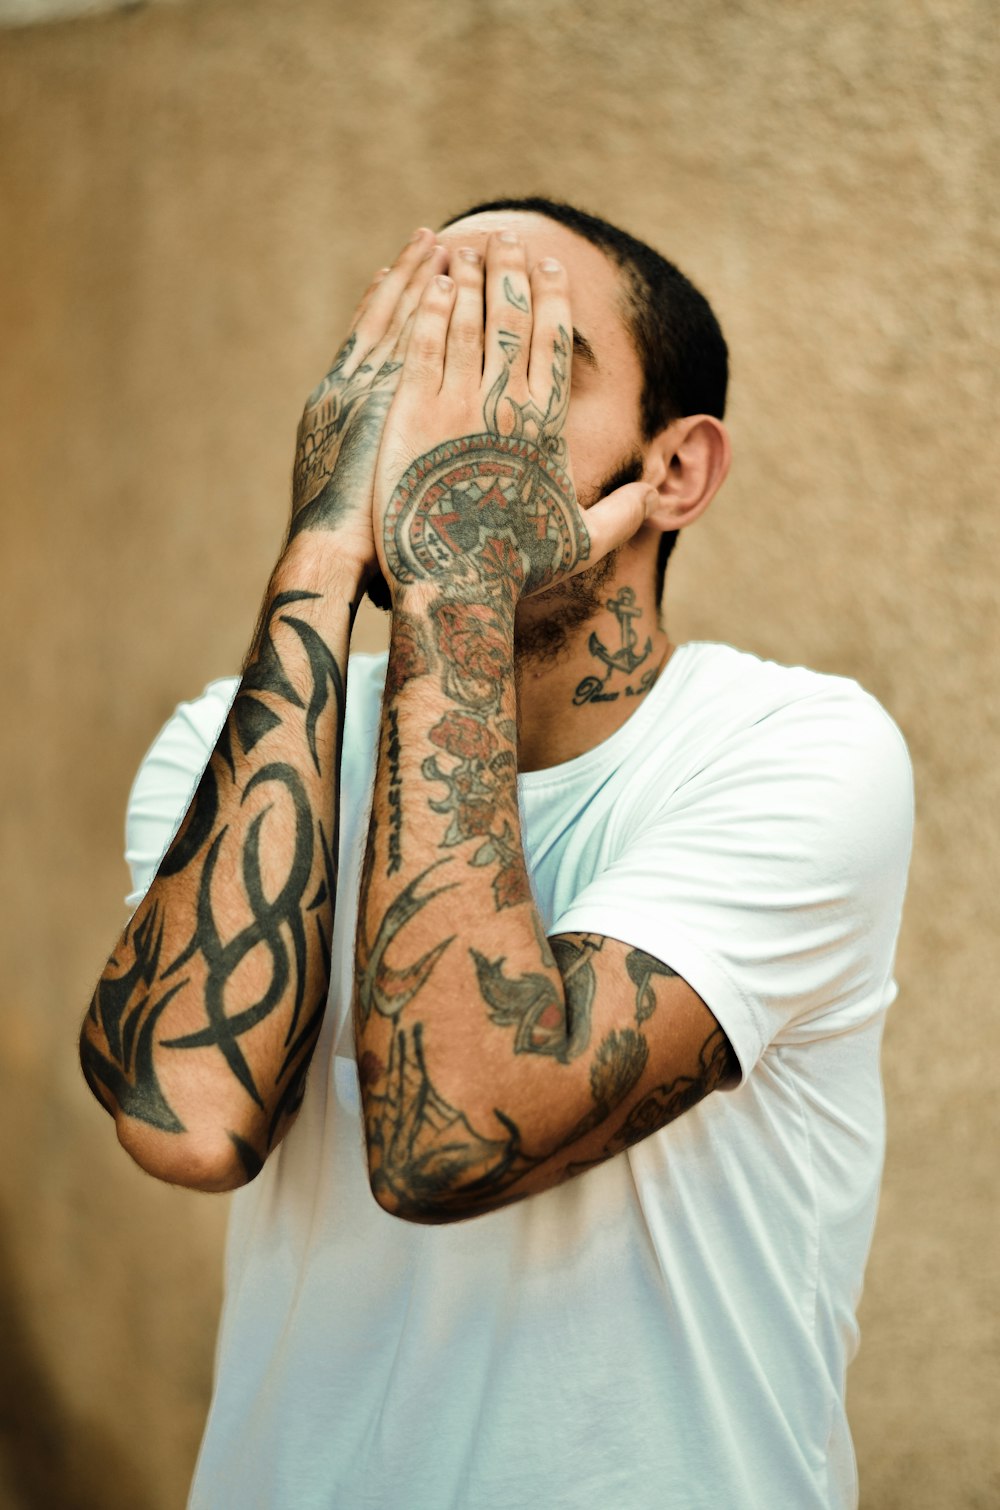 A Man With Tattoos On His Face Photo – Free Tattoo Image On Unsplash